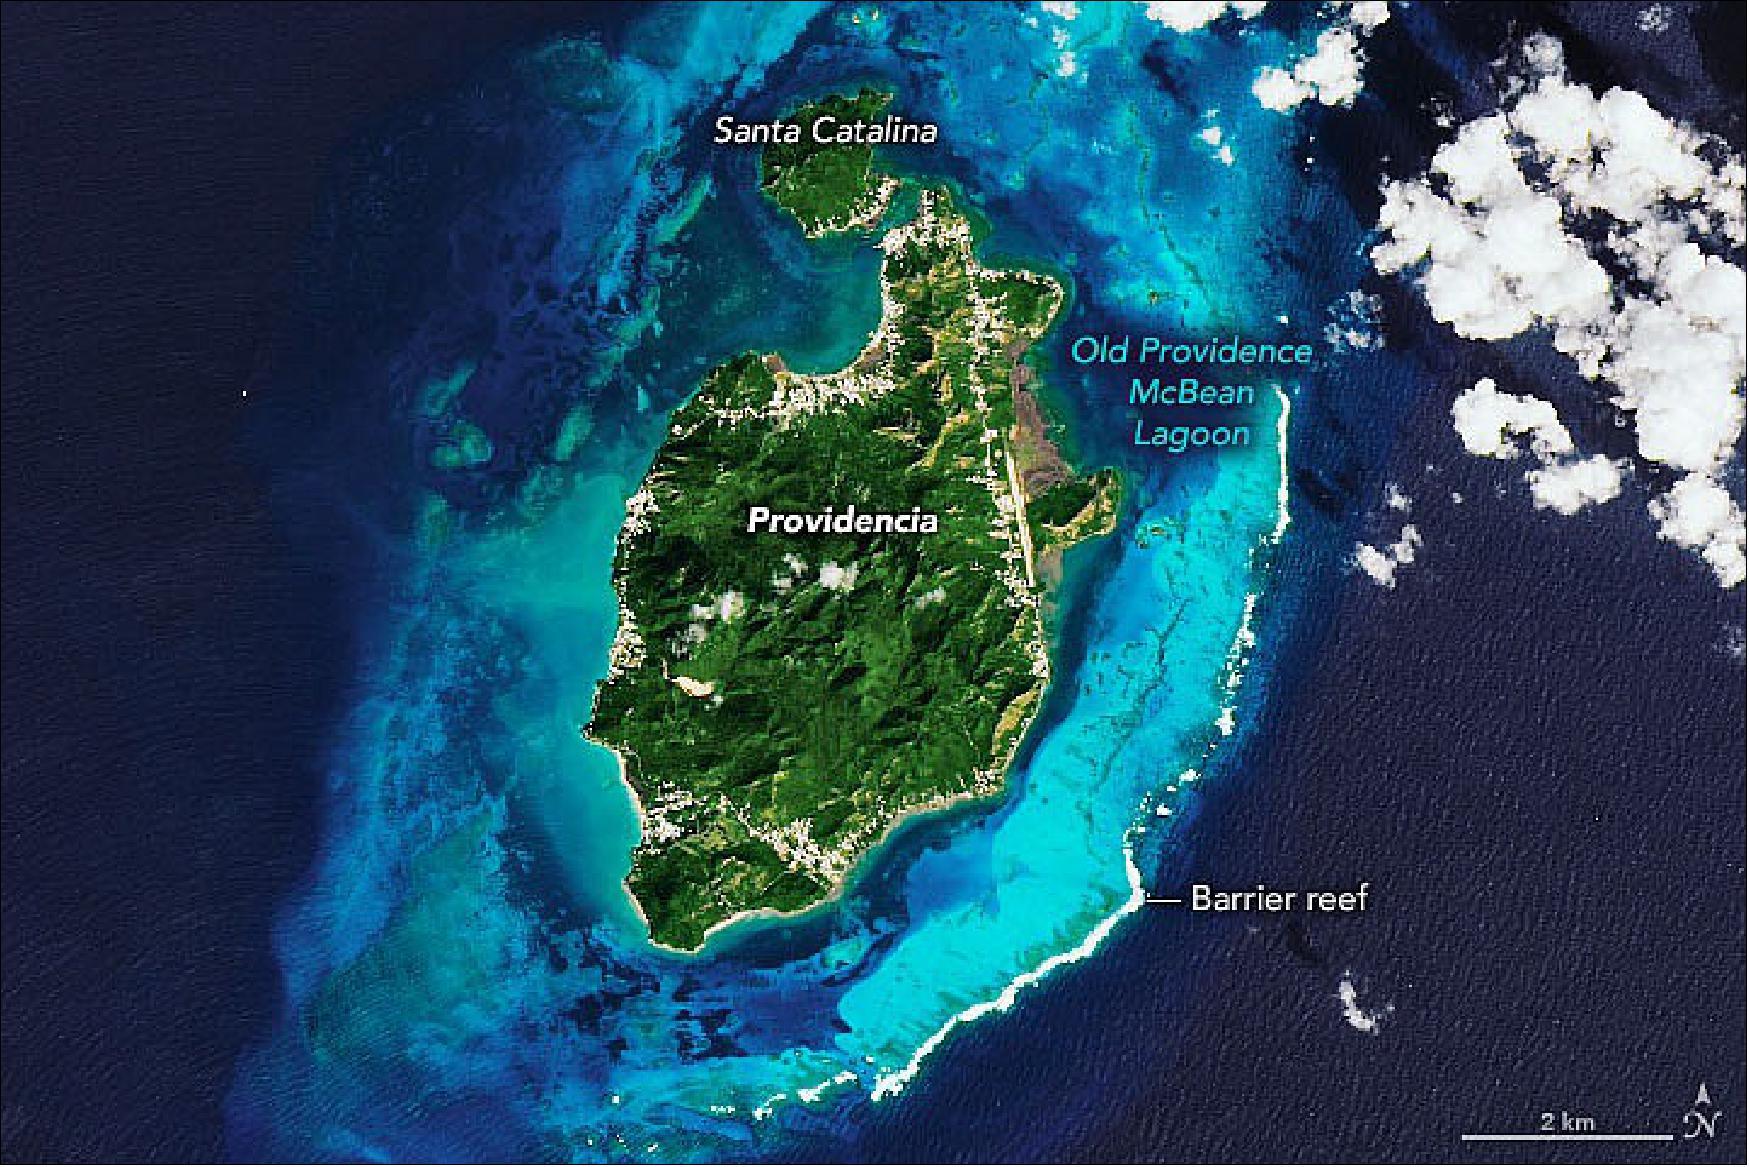 Figure 36: Once a sanctuary for pilgrims and privateers, the Caribbean island is now a refuge for a quiet Caribbean life and raw natural beauty.. Situated in the southwestern Caribbean Sea, Providencia was once an island sanctuary for pilgrims and privateers. Today, it is mostly a refuge of quieter Caribbean life amid raw natural beauty. The Operational Land Imager-2 (OLI-2) on Landsat-9 acquired this image of it on January 9, 2022 (image credit: NASA Earth Observatory image by Joshua Stevens, using Landsat data from the U.S. Geological Survey. Story by Michael Carlowicz)